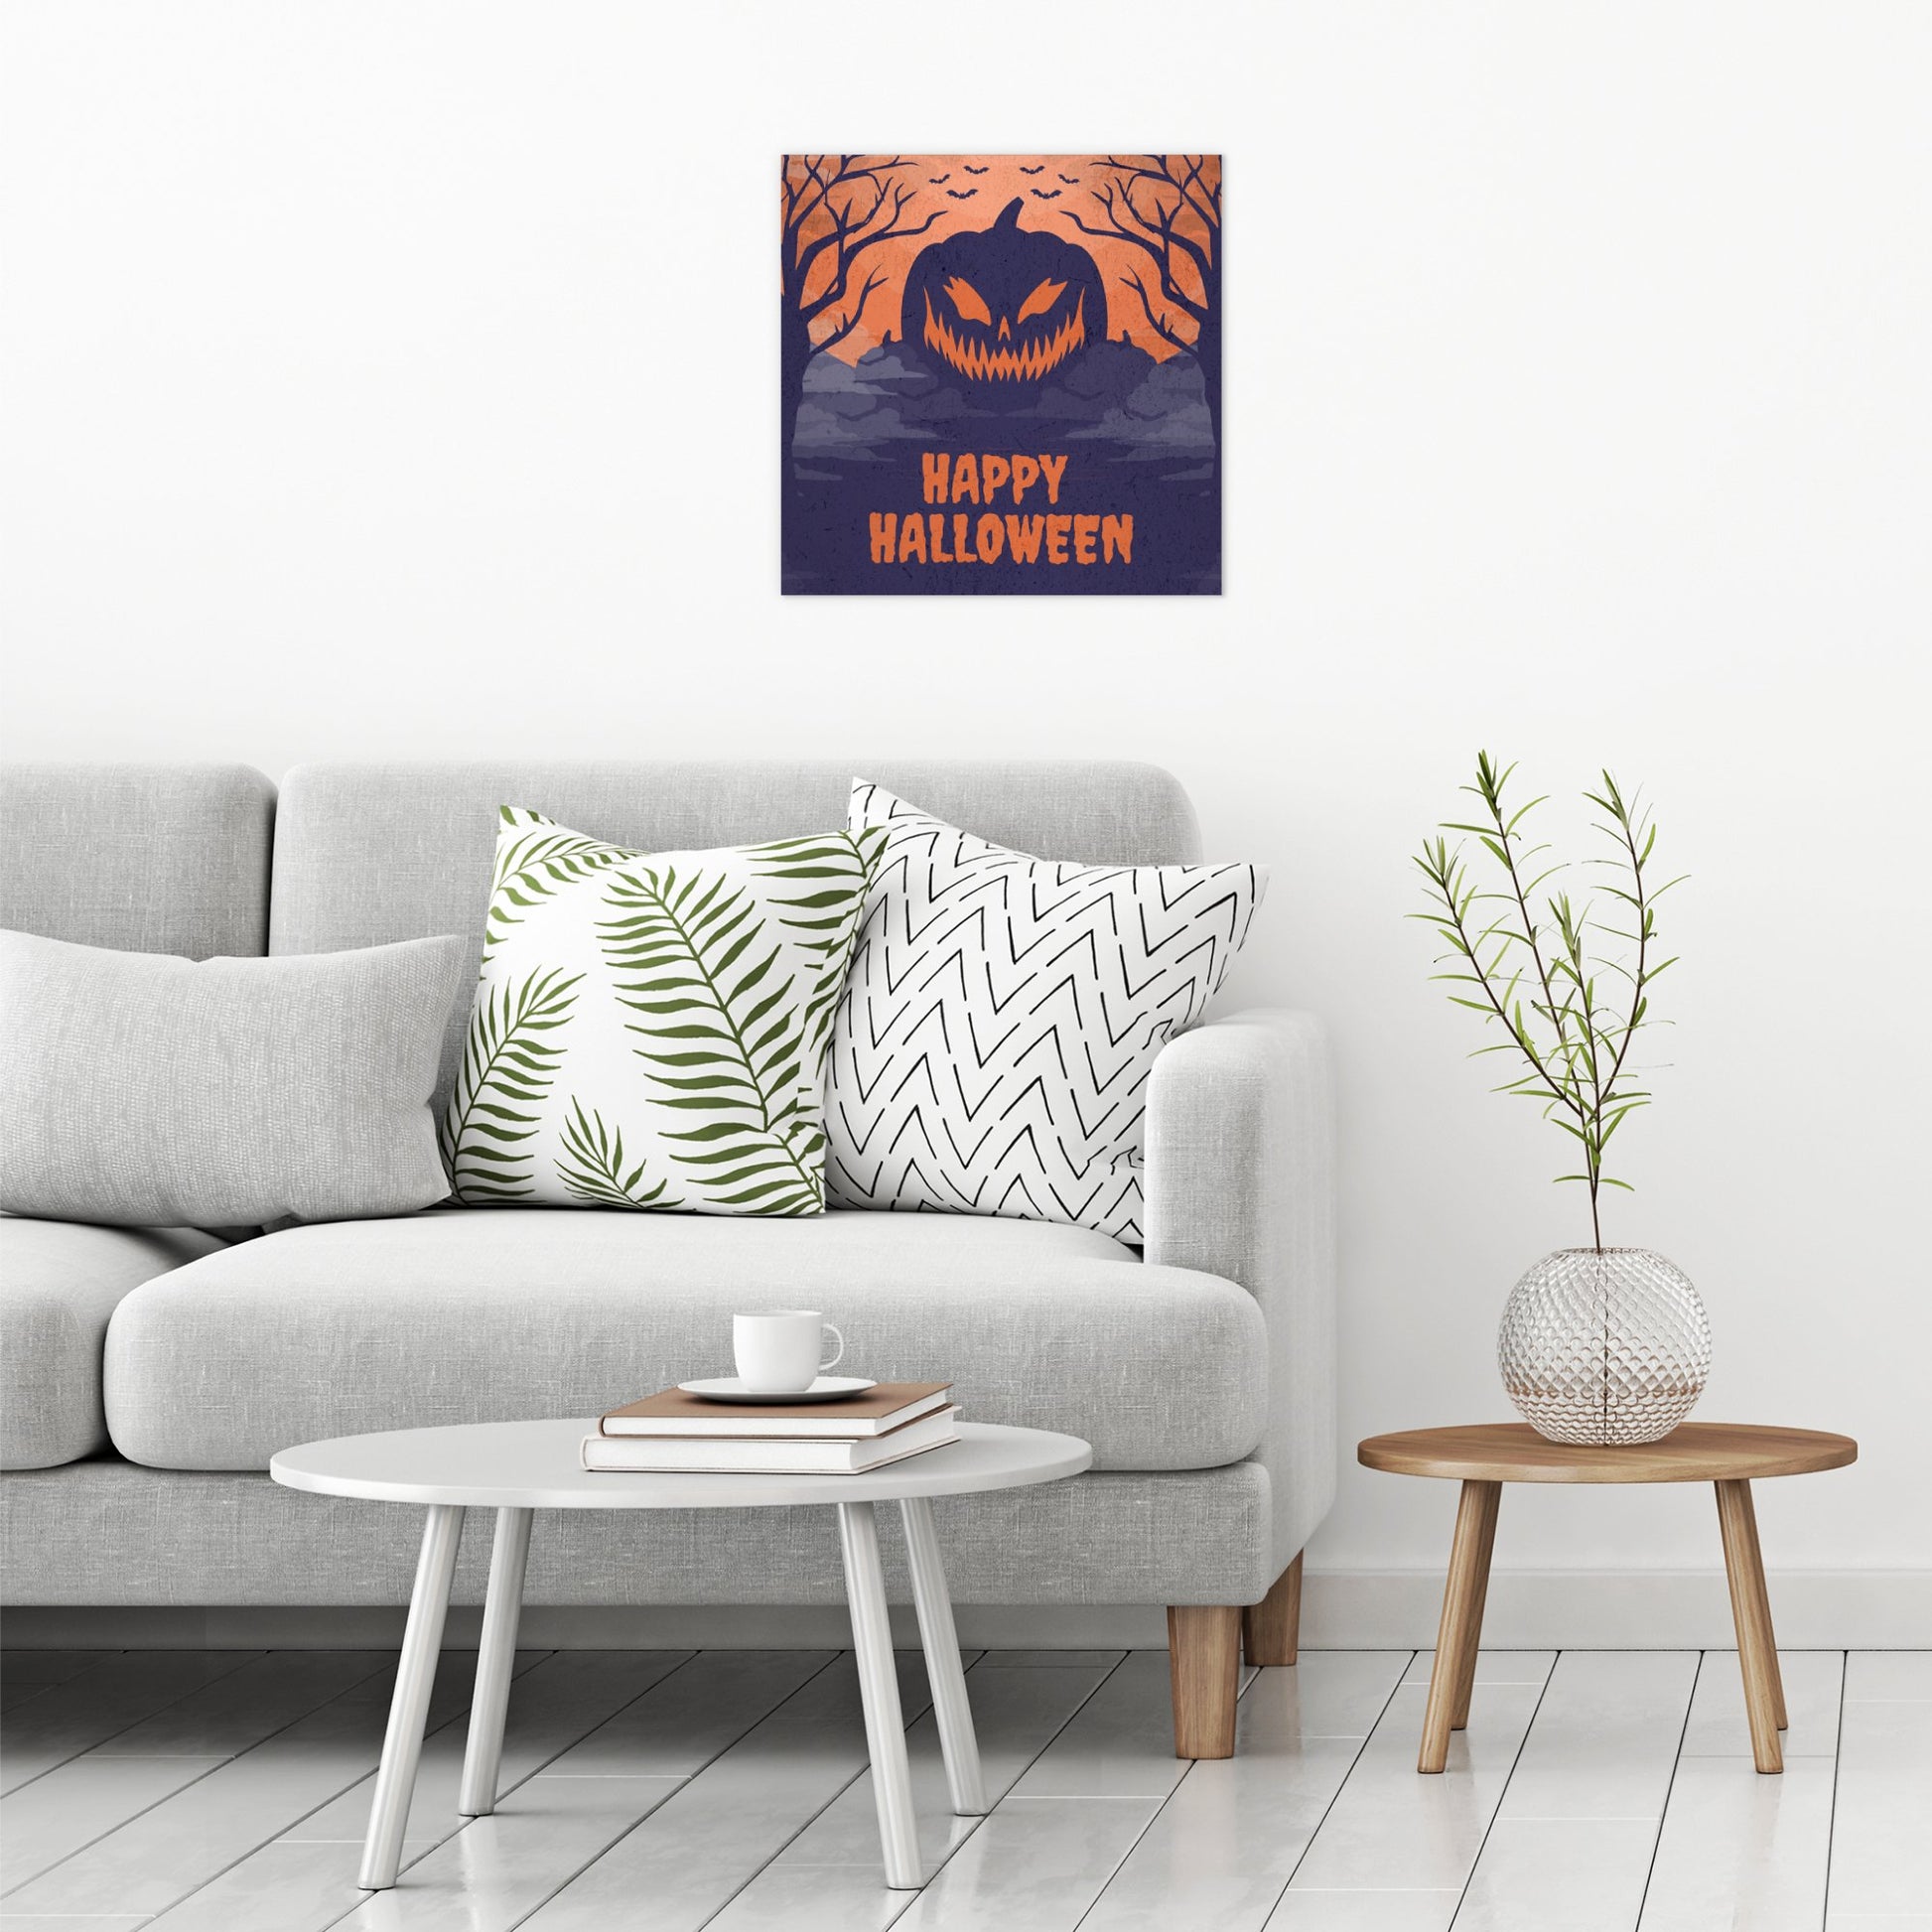 A contemporary modern room view showing a large size metal art poster display plate with printed design of a Happy Halloween Scary Pumpkin